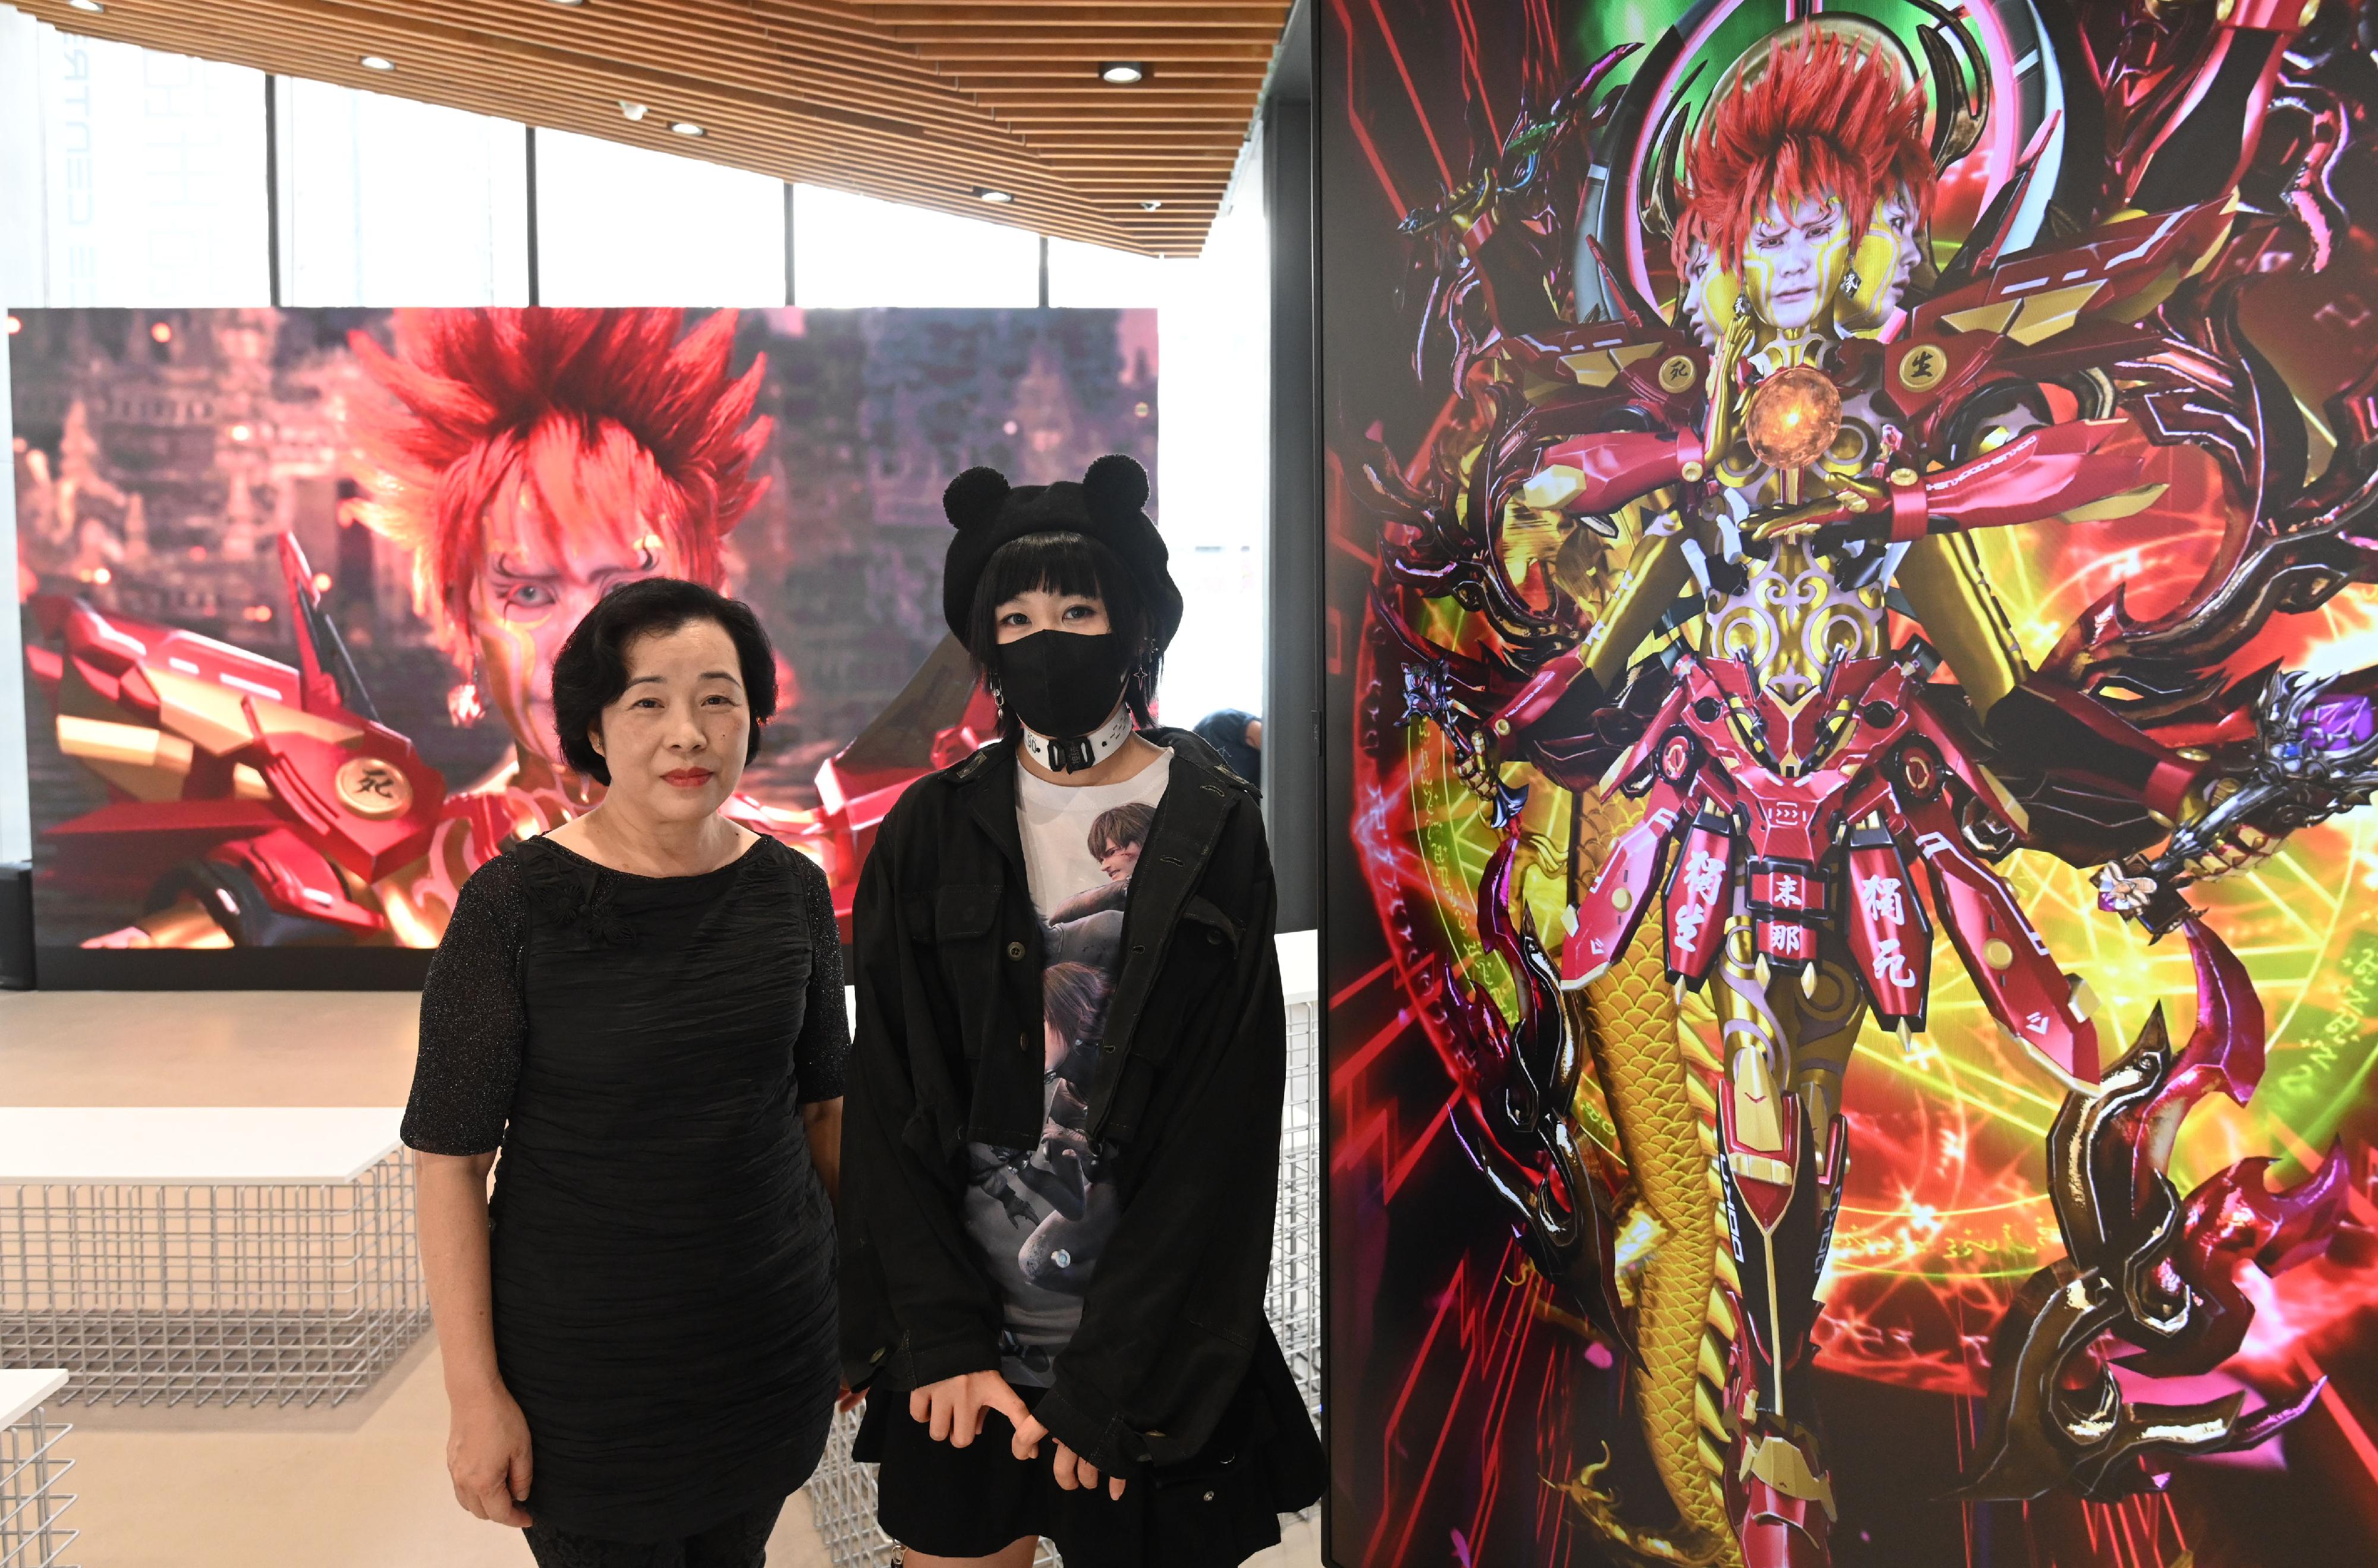 The Oil Street Art Space (Oi!) presents the "DOKU Hong Kong Experience Centre" exhibition by Mainland new media artist Lu Yang from tomorrow (March 18) to August 27. Photo shows the Head of the Art Promotion Office, Dr Lesley Lau (left), and Lu (right).